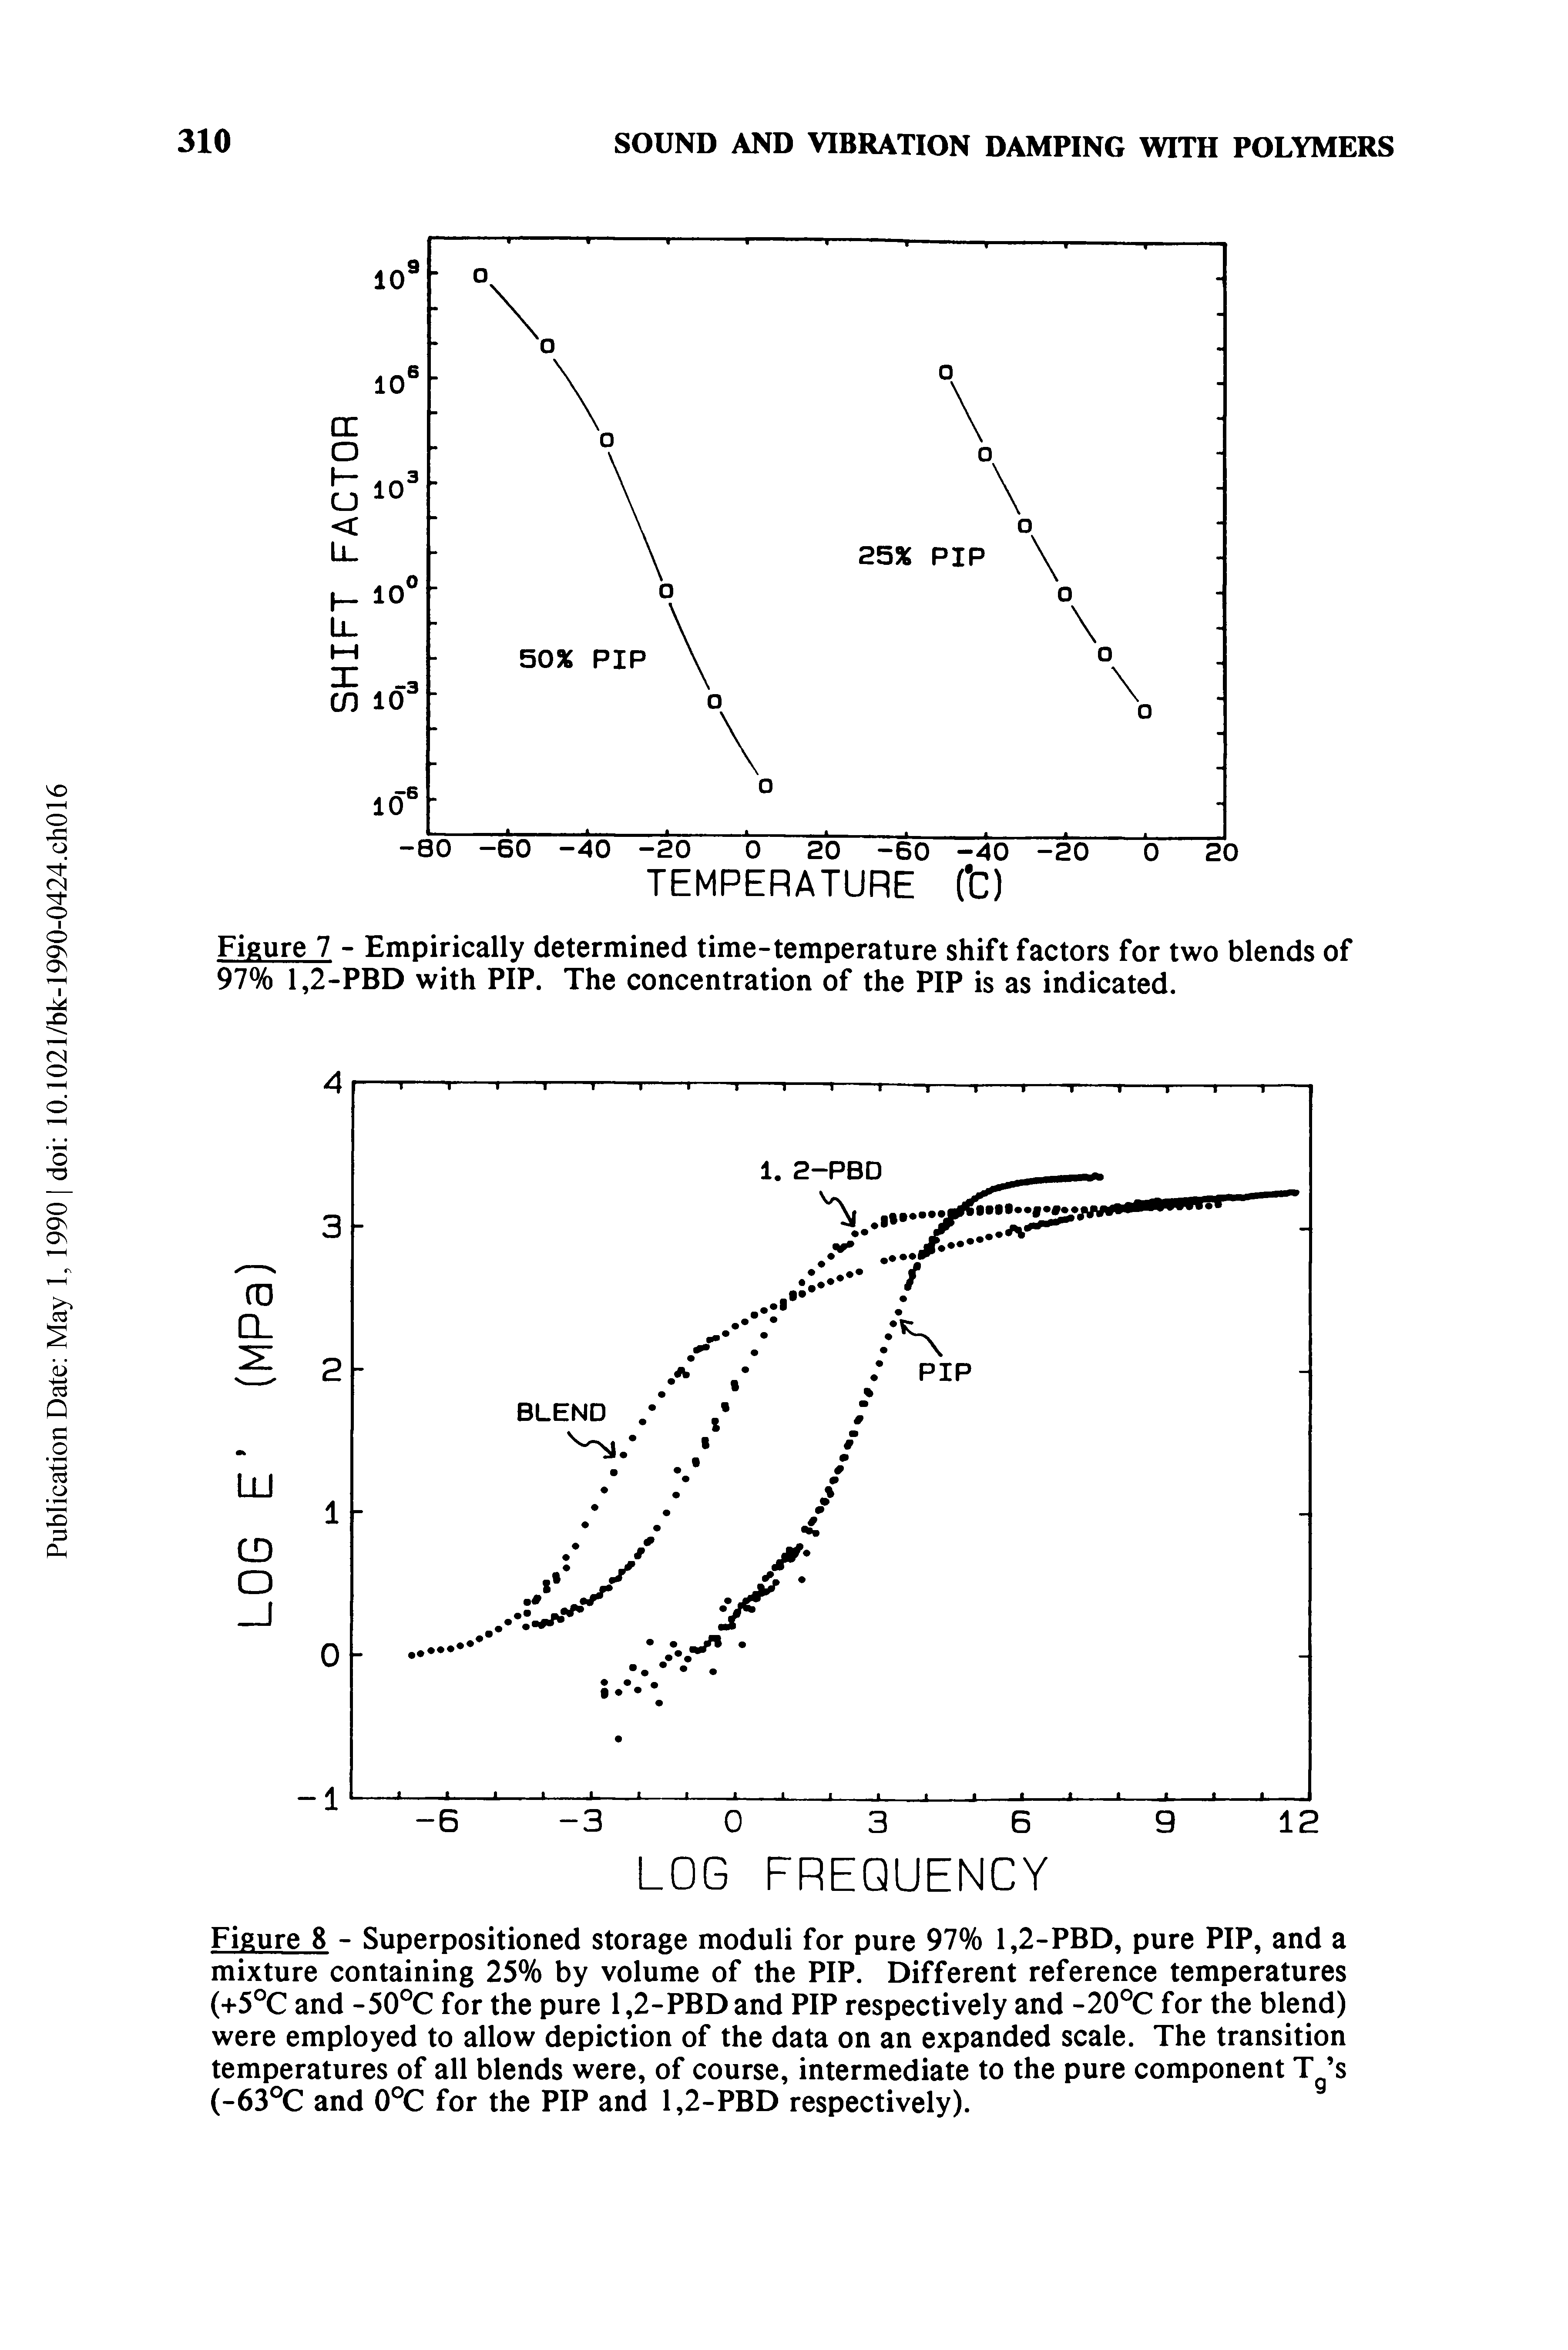 Figure 8 - Superpositioned storage moduli for pure 97% 1,2-PBD, pure PIP, and a mixture containing 25% by volume of the PIP. Different reference temperatures (+5°C and -50°C for the pure 1,2-PBD and PIP respectively and -20°C for the blend) were employed to allow depiction of the data on an expanded scale. The transition temperatures of all blends were, of course, intermediate to the pure component T s (-63°C and 0°C for the PIP and 1,2-PBD respectively).